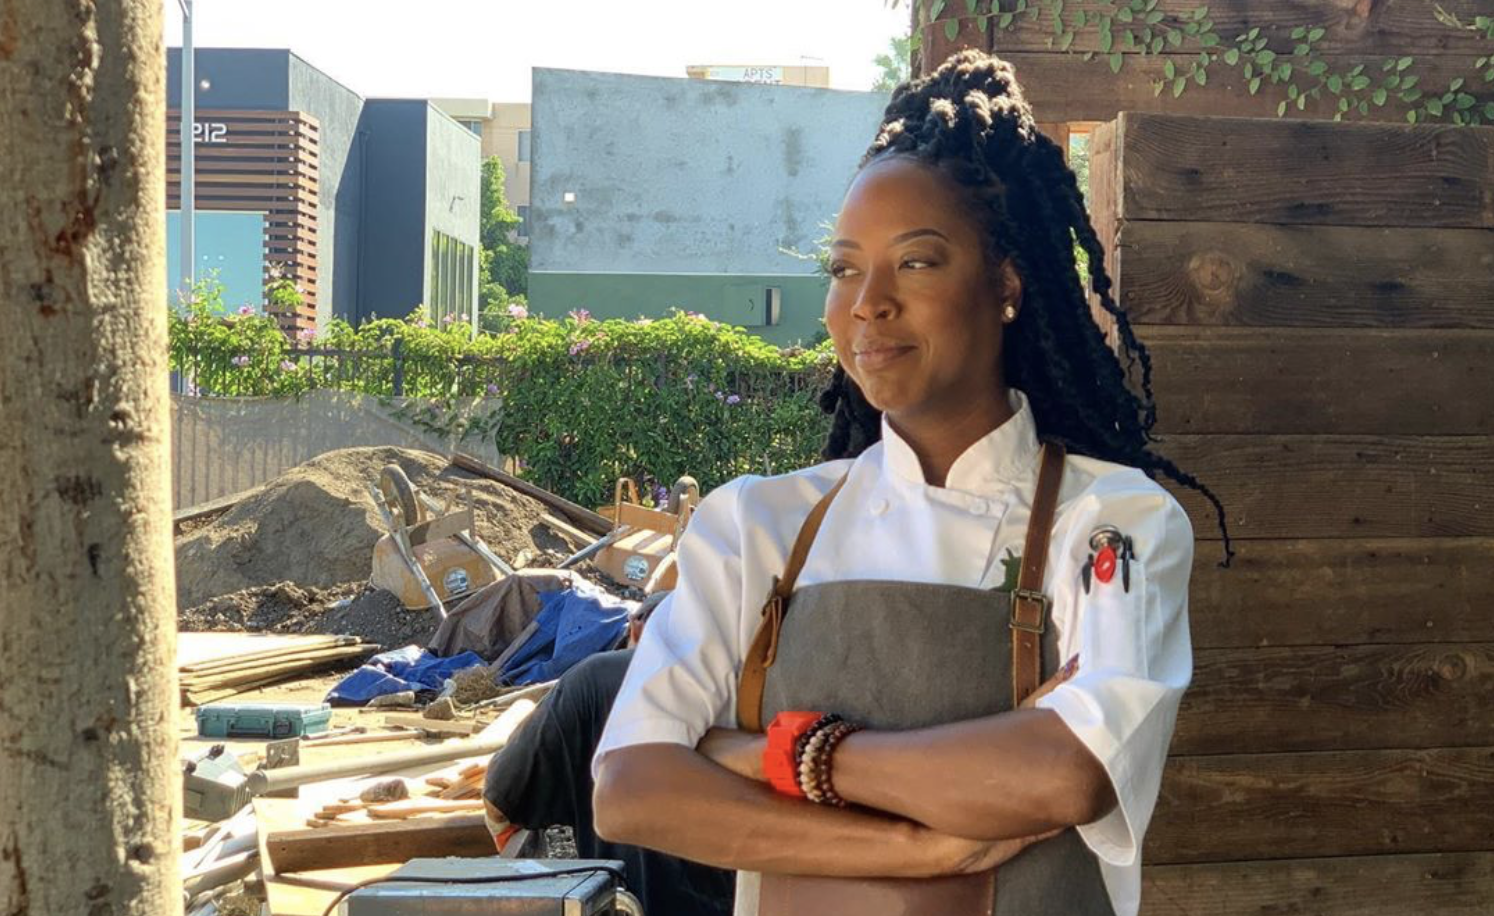 Meet Andrea Drummer, the Black Chef Behind the First Weed-Infused Cafe in America